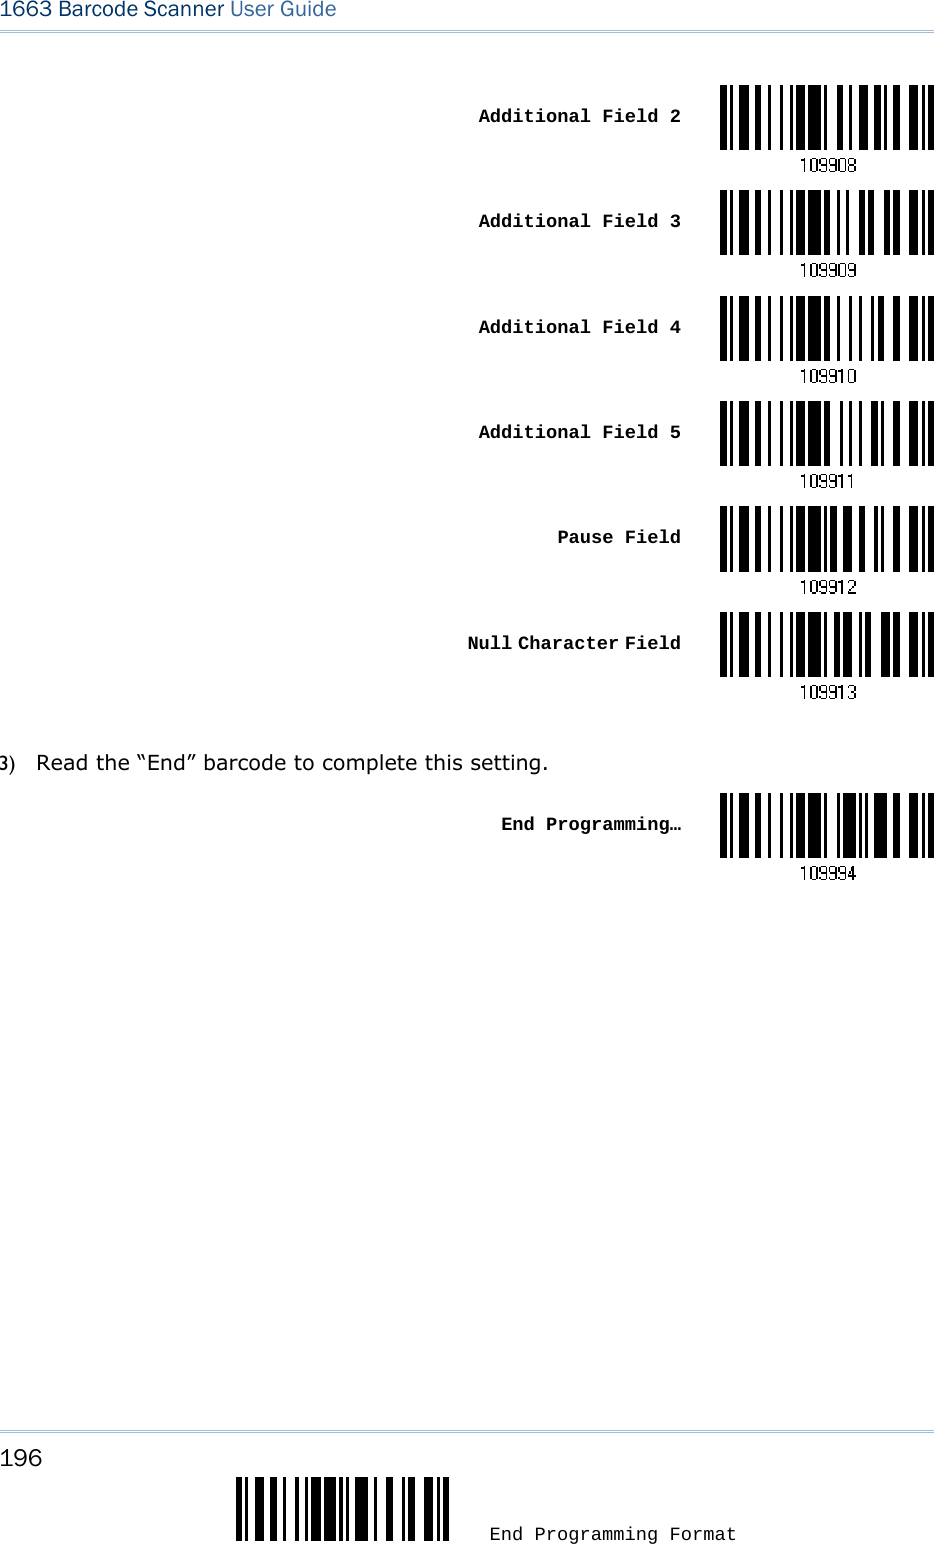 196  End Programming Format 1663 Barcode Scanner User Guide   Additional Field 2 Additional Field 3 Additional Field 4 Additional Field 5 Pause Field Null Character Field   3) Read the “End” barcode to complete this setting.  End Programming…   